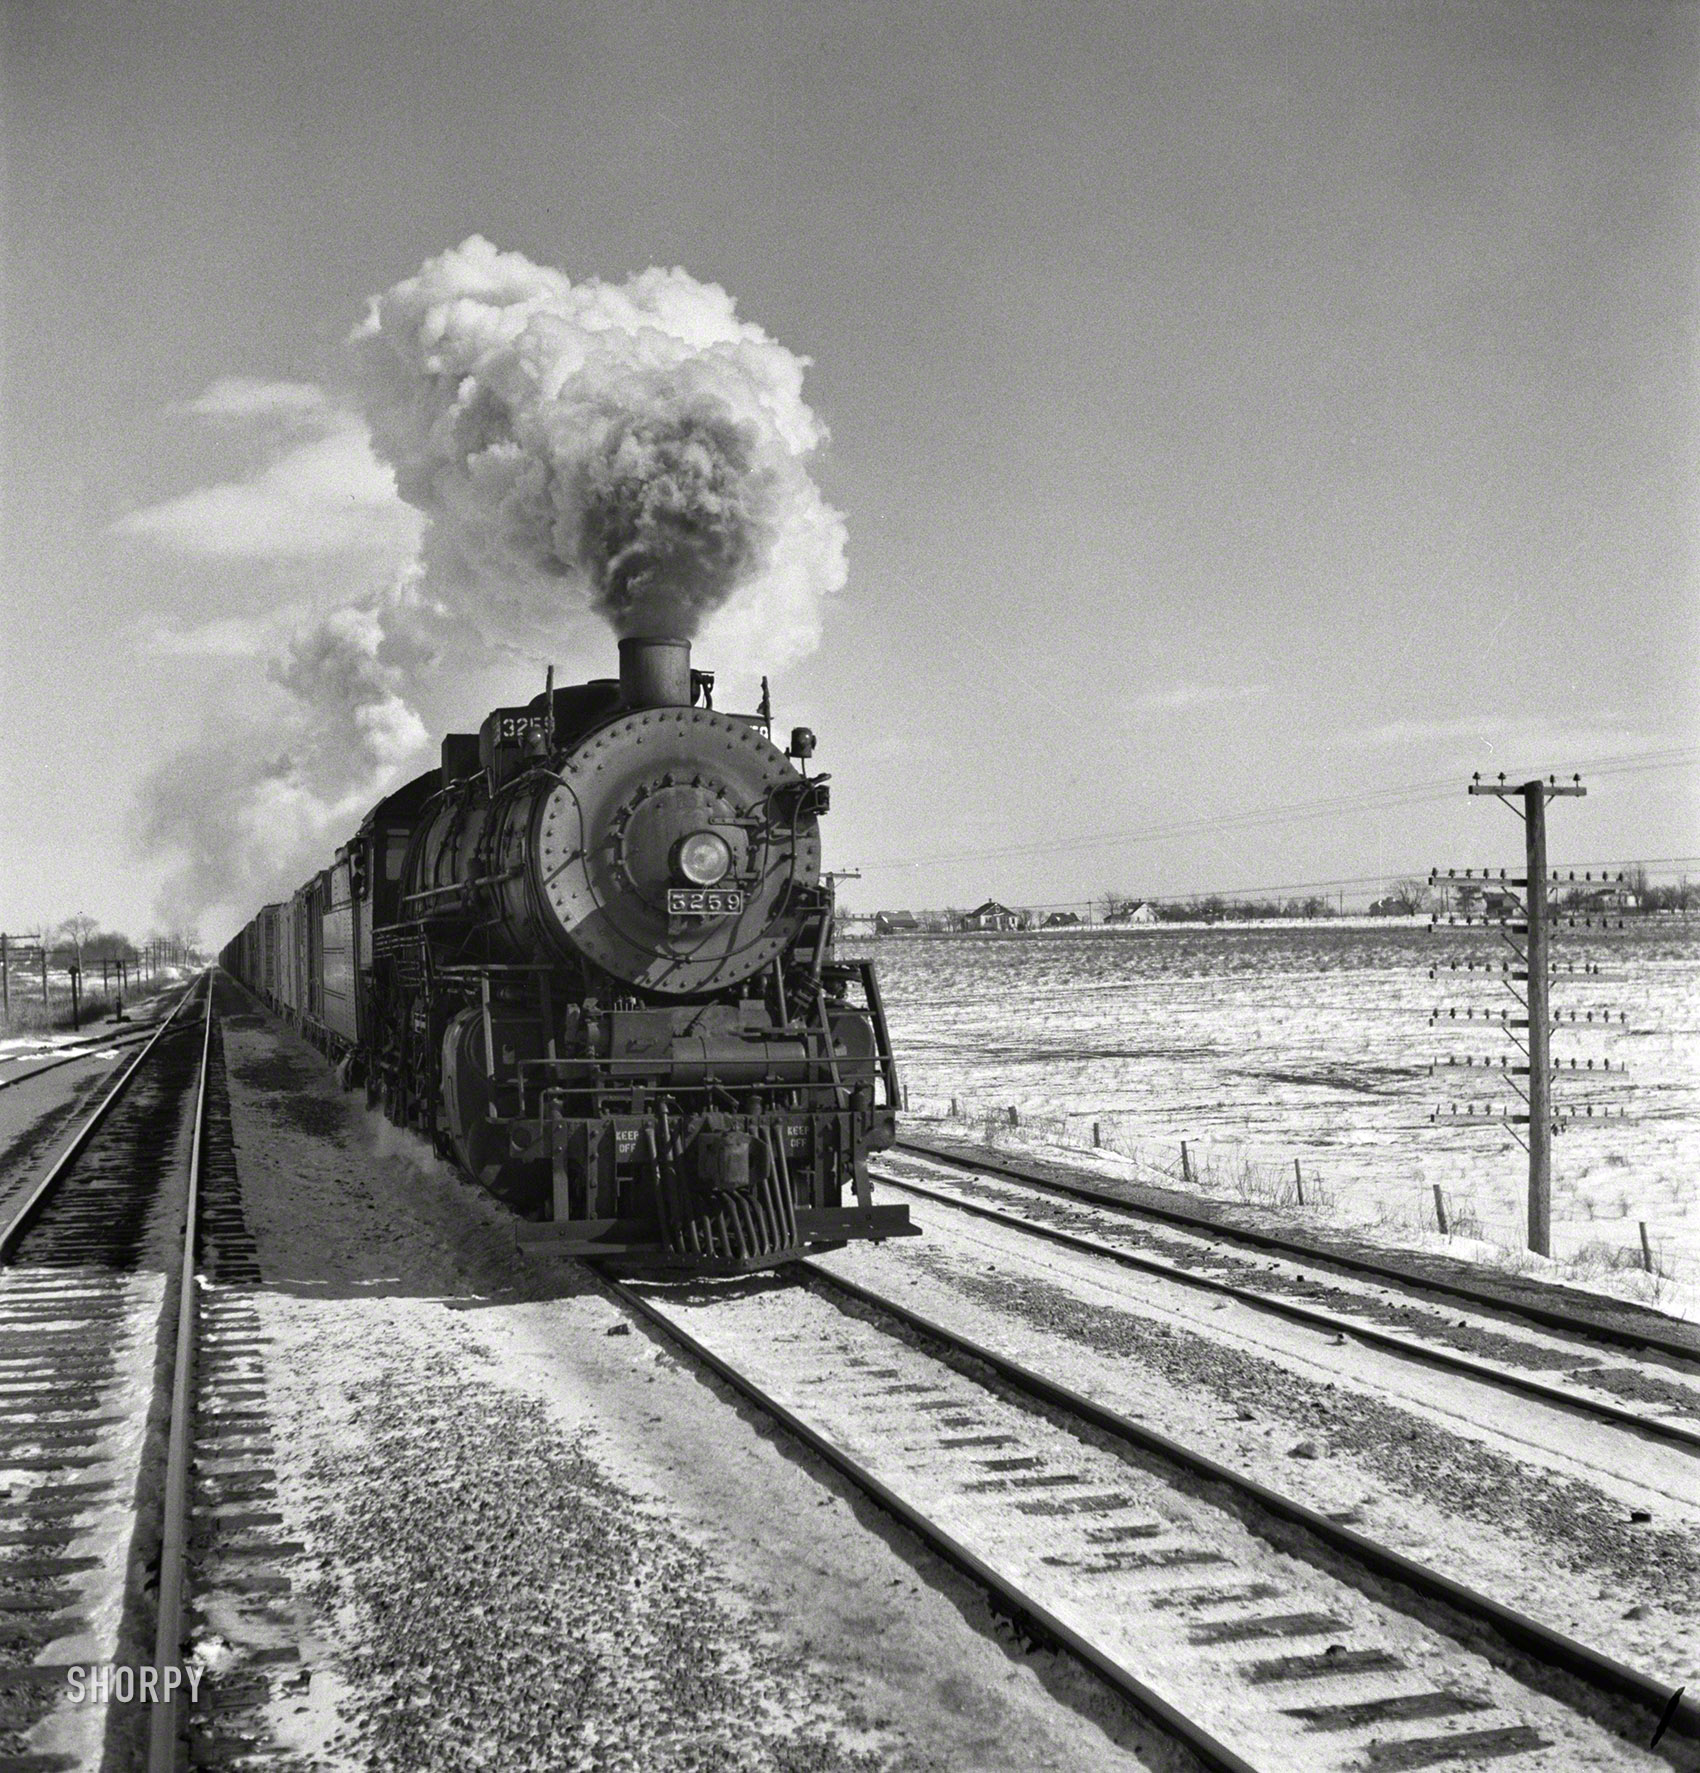 March 1943. "On the Atchison, Topeka & Santa Fe between Chicago and Chillicothe, Illinois." Another of the many photos by Jack Delano documenting his trip on a freight train from Chicago to California. View full size.